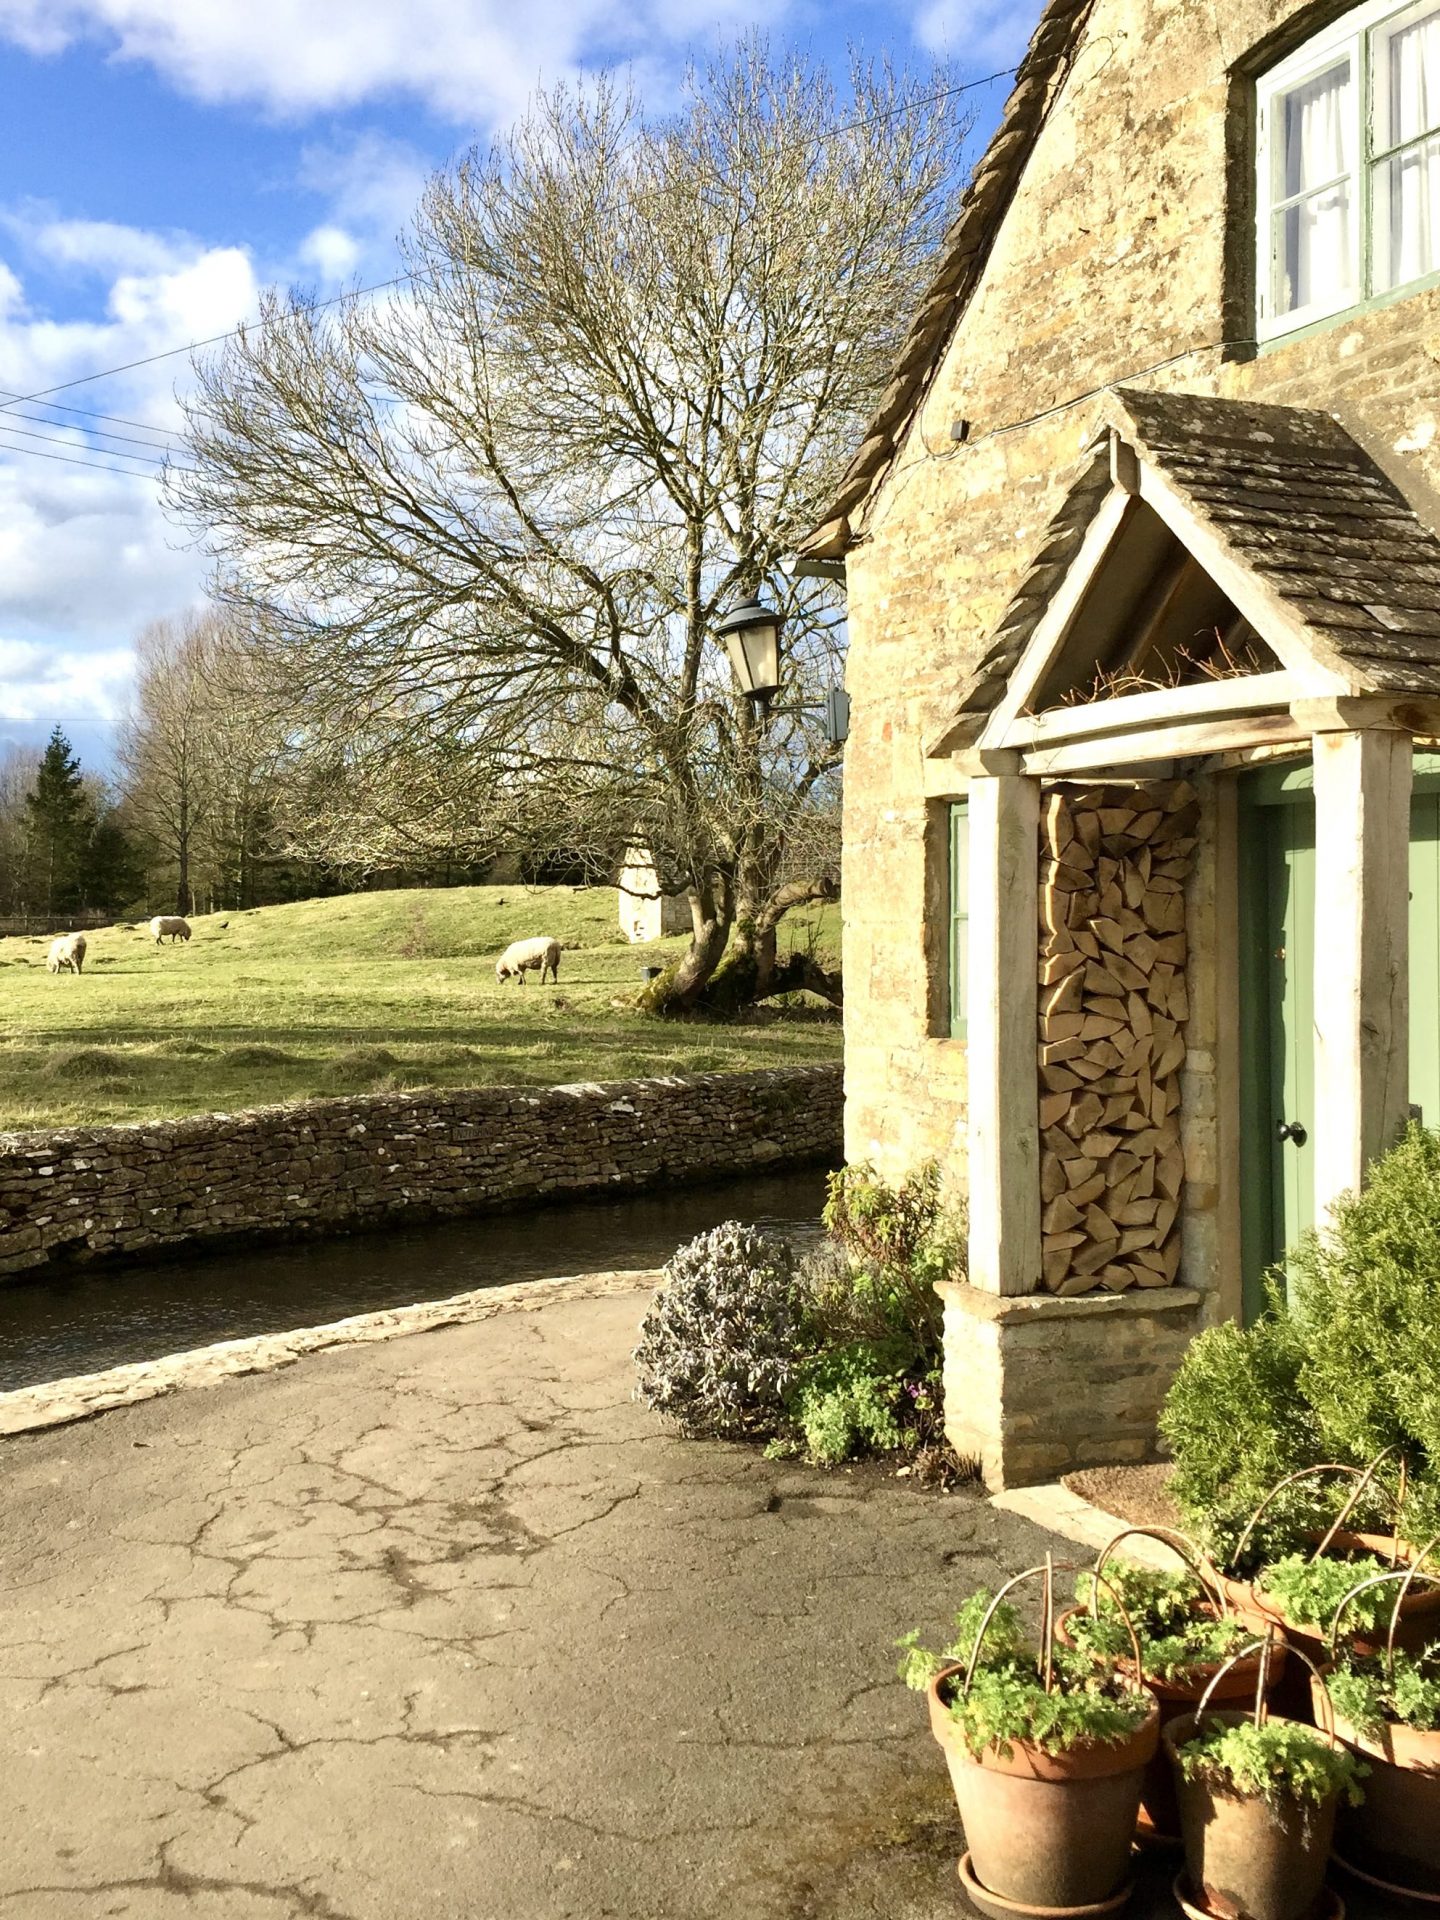 picture of a doorway with firewood outside the front door, nearby stream and sheep in The Cotswolds